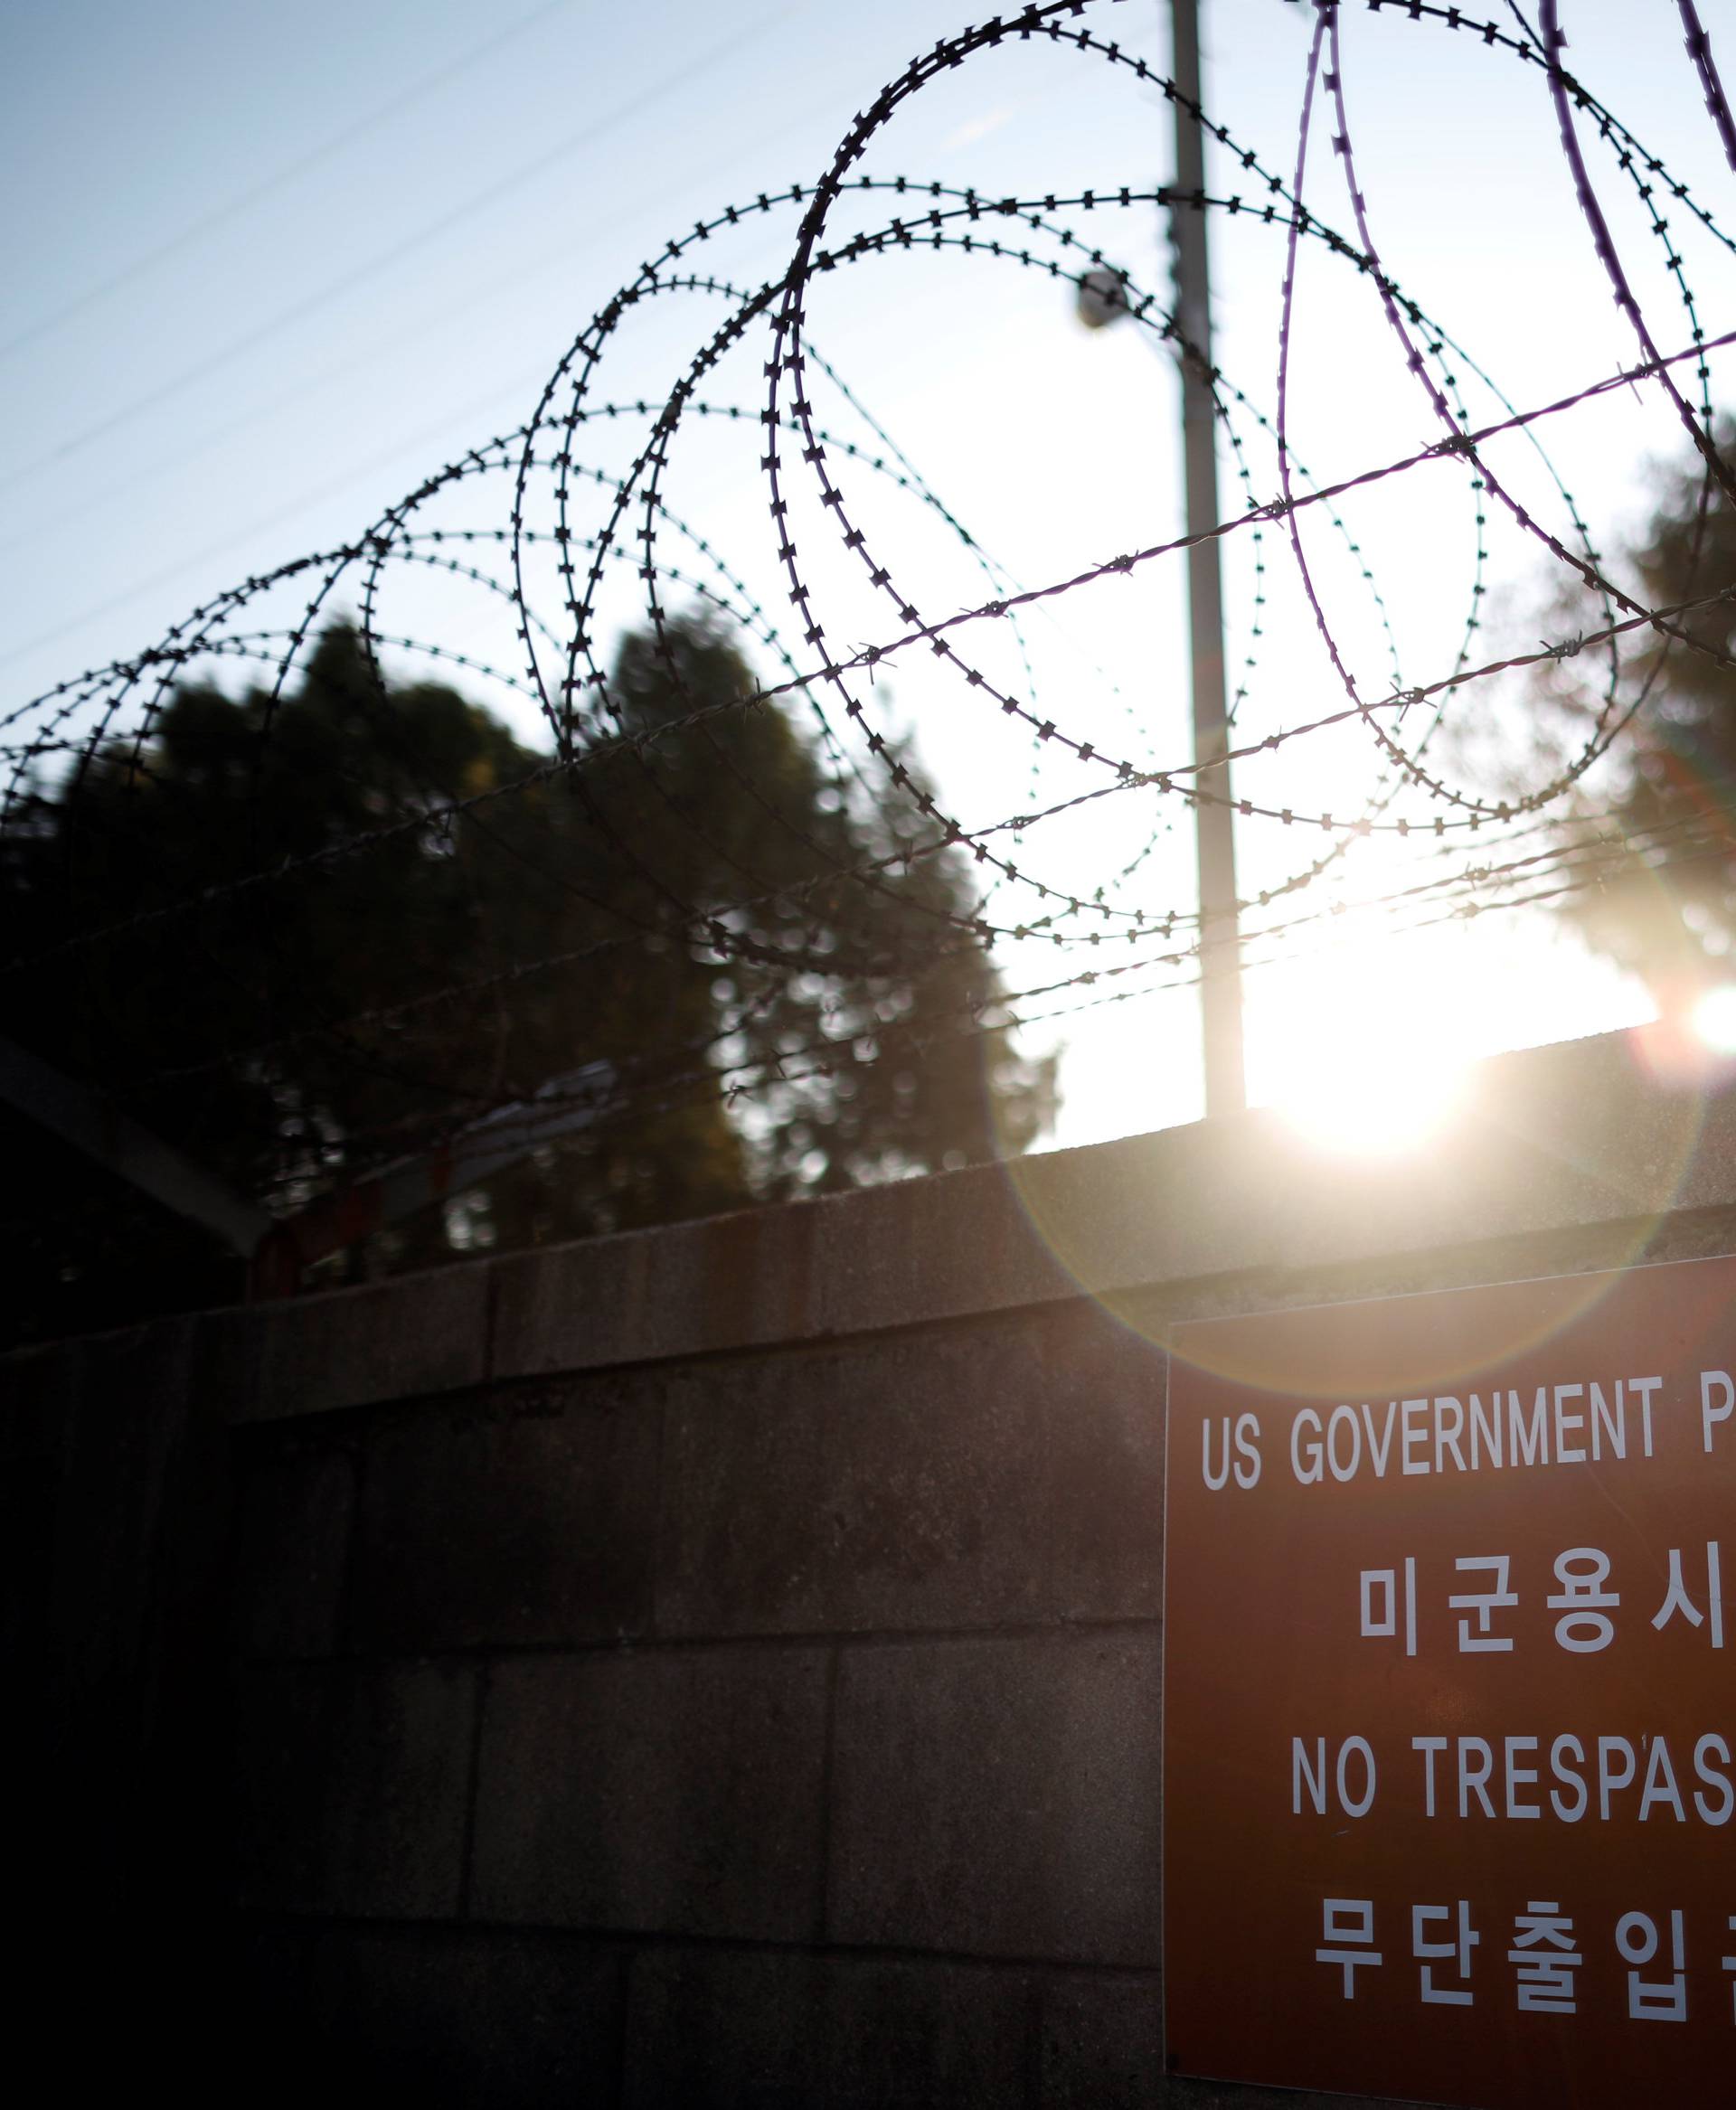 A barbed-wire fence is seen at a U.S. army base in Seoul